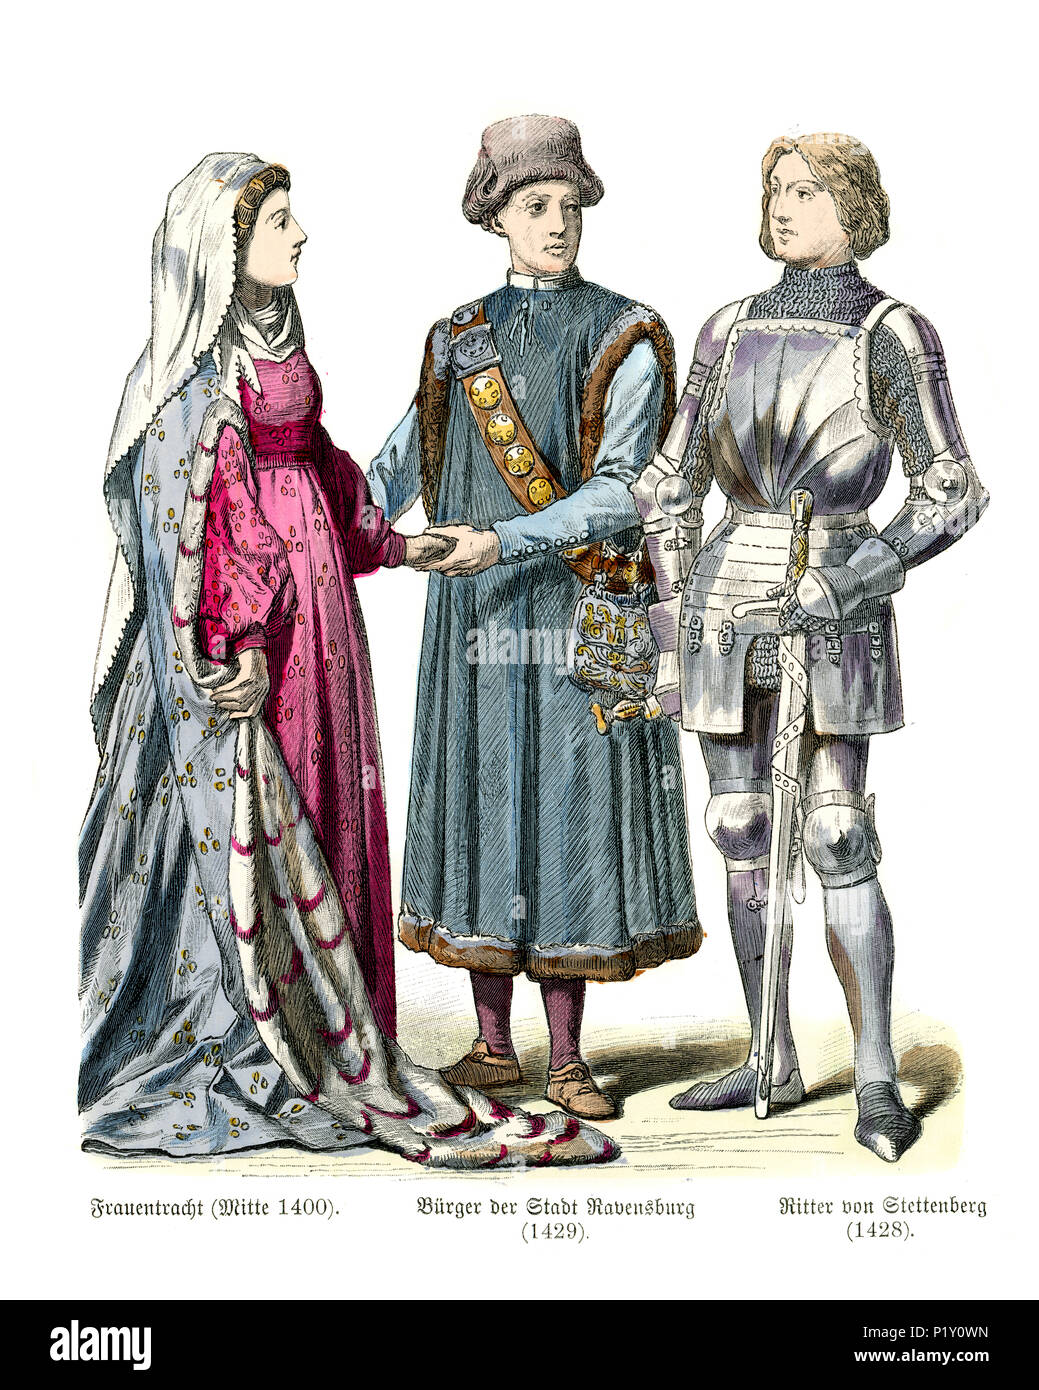 Vintage engraving of History of Fashion, Costumes of Germany. German Medieval knight of Stettenberg, lady, citizen of  Ravensburg 15th Century Stock Photo